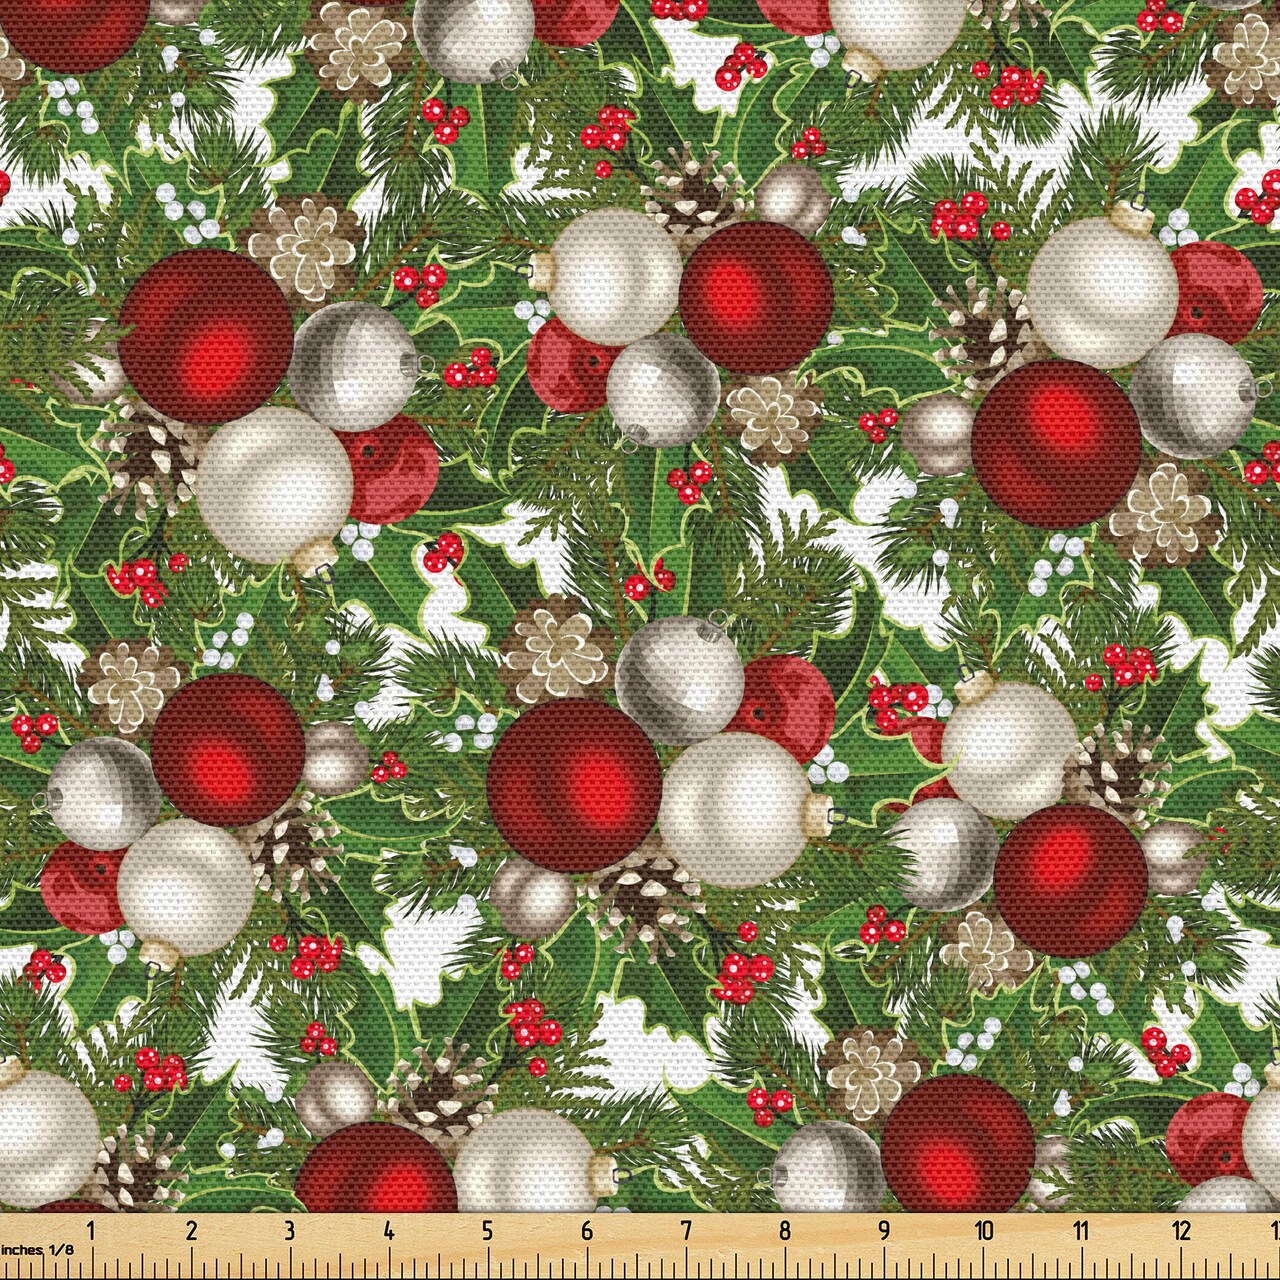 Ambesonne Christmas Fabric by the Yard, Pine Fir Cones Balls and Coniferous Tree Leaves Holly Berry Old Fashioned, Decorative Fabric for Upholstery and Home Accents, 1 Yard, Red Green Grey